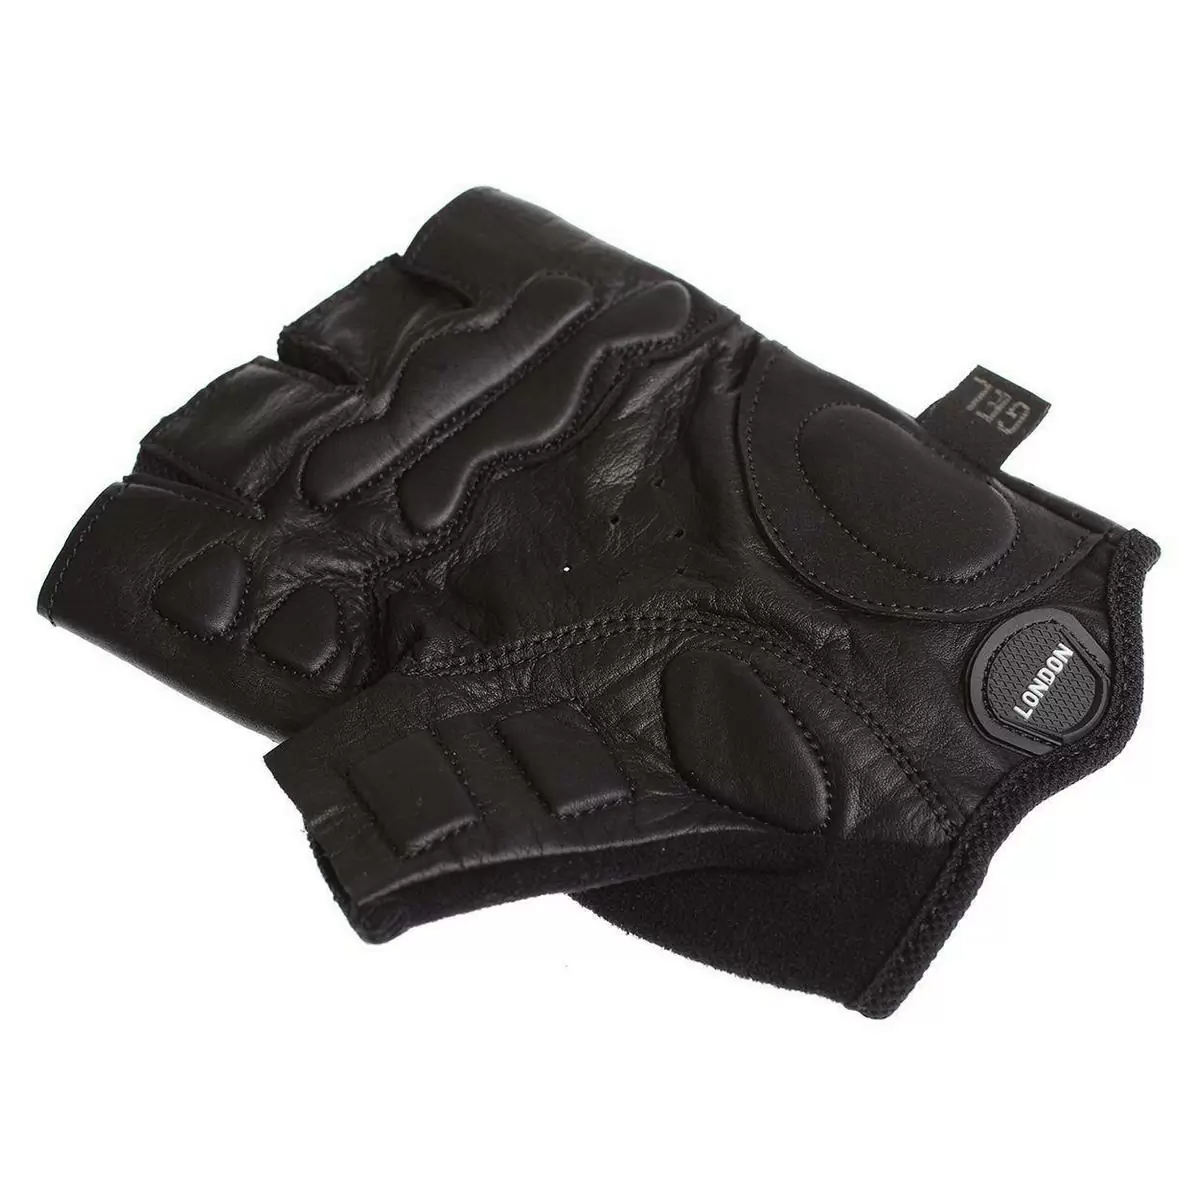 leather gloves classic sport size s black #3